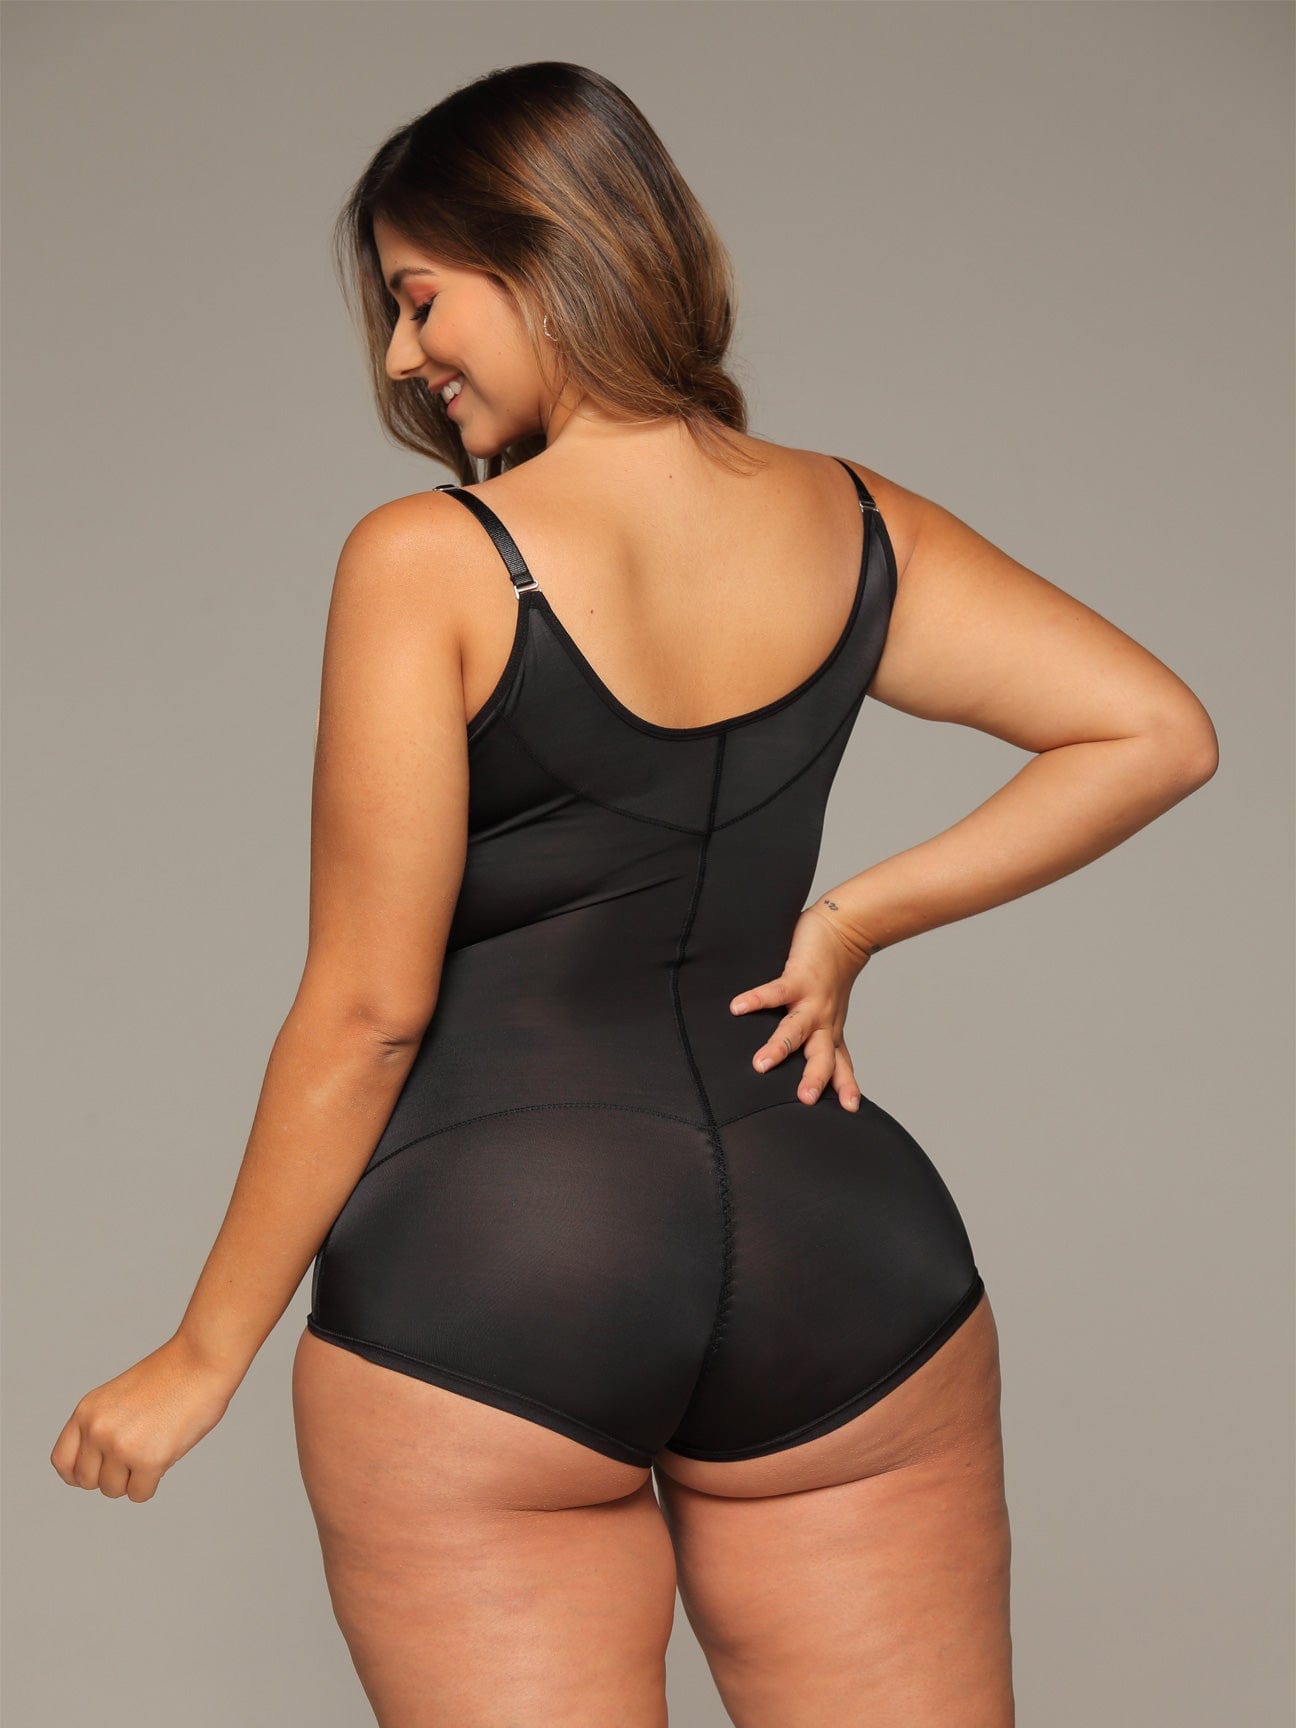 Back butt view of the black invisible body suit with panty.